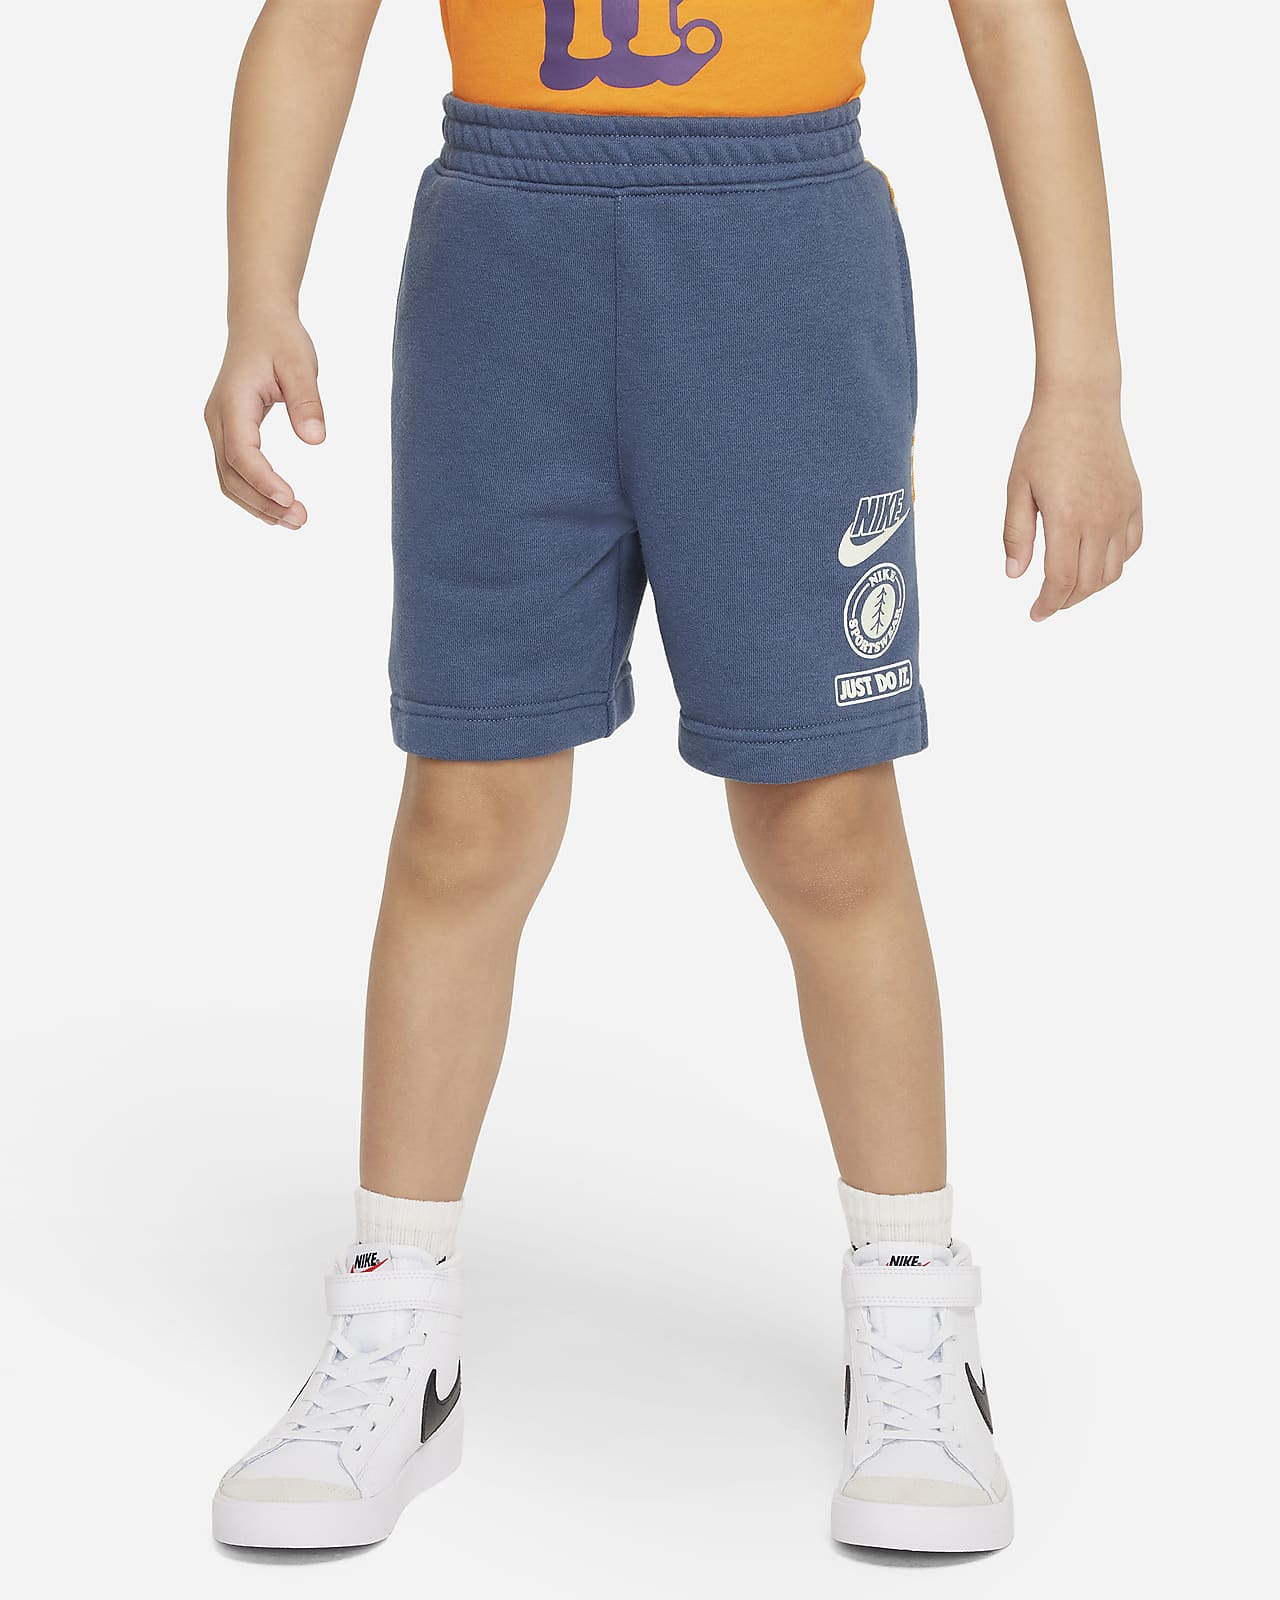 Nike Sportswear "Leave No Trace" French Terry Taping Shorts Little Kids' Shorts